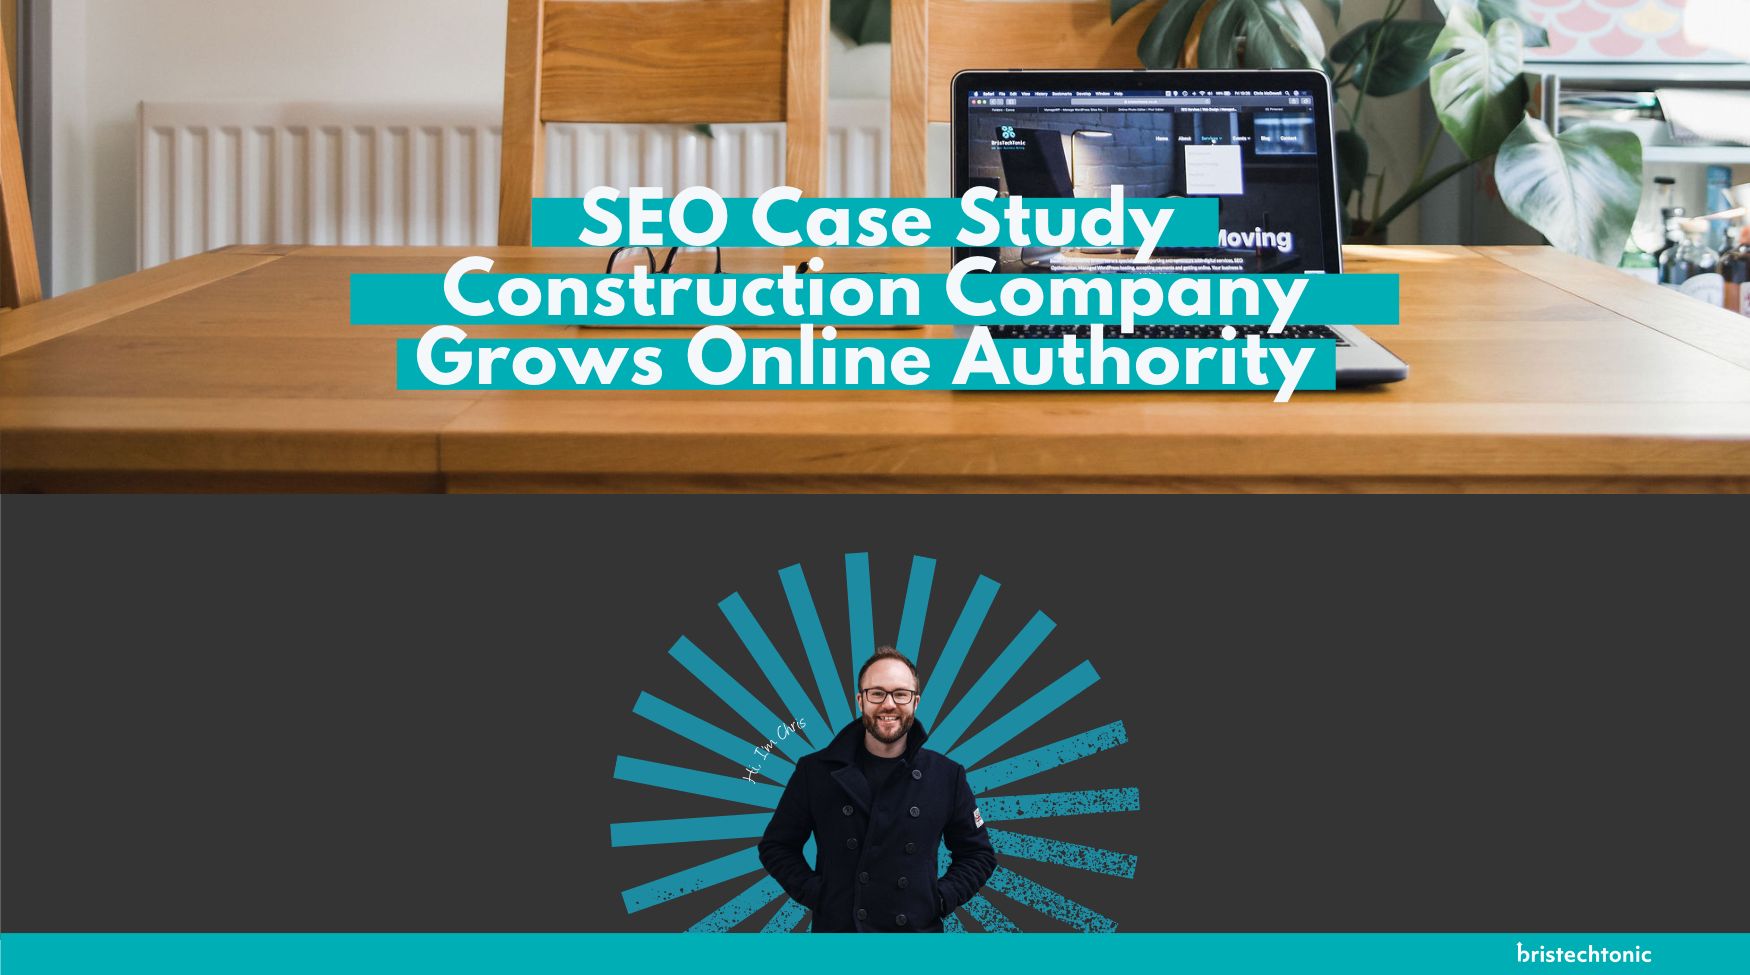 Construction Company Grows Online Authority With 400% More Backlinks